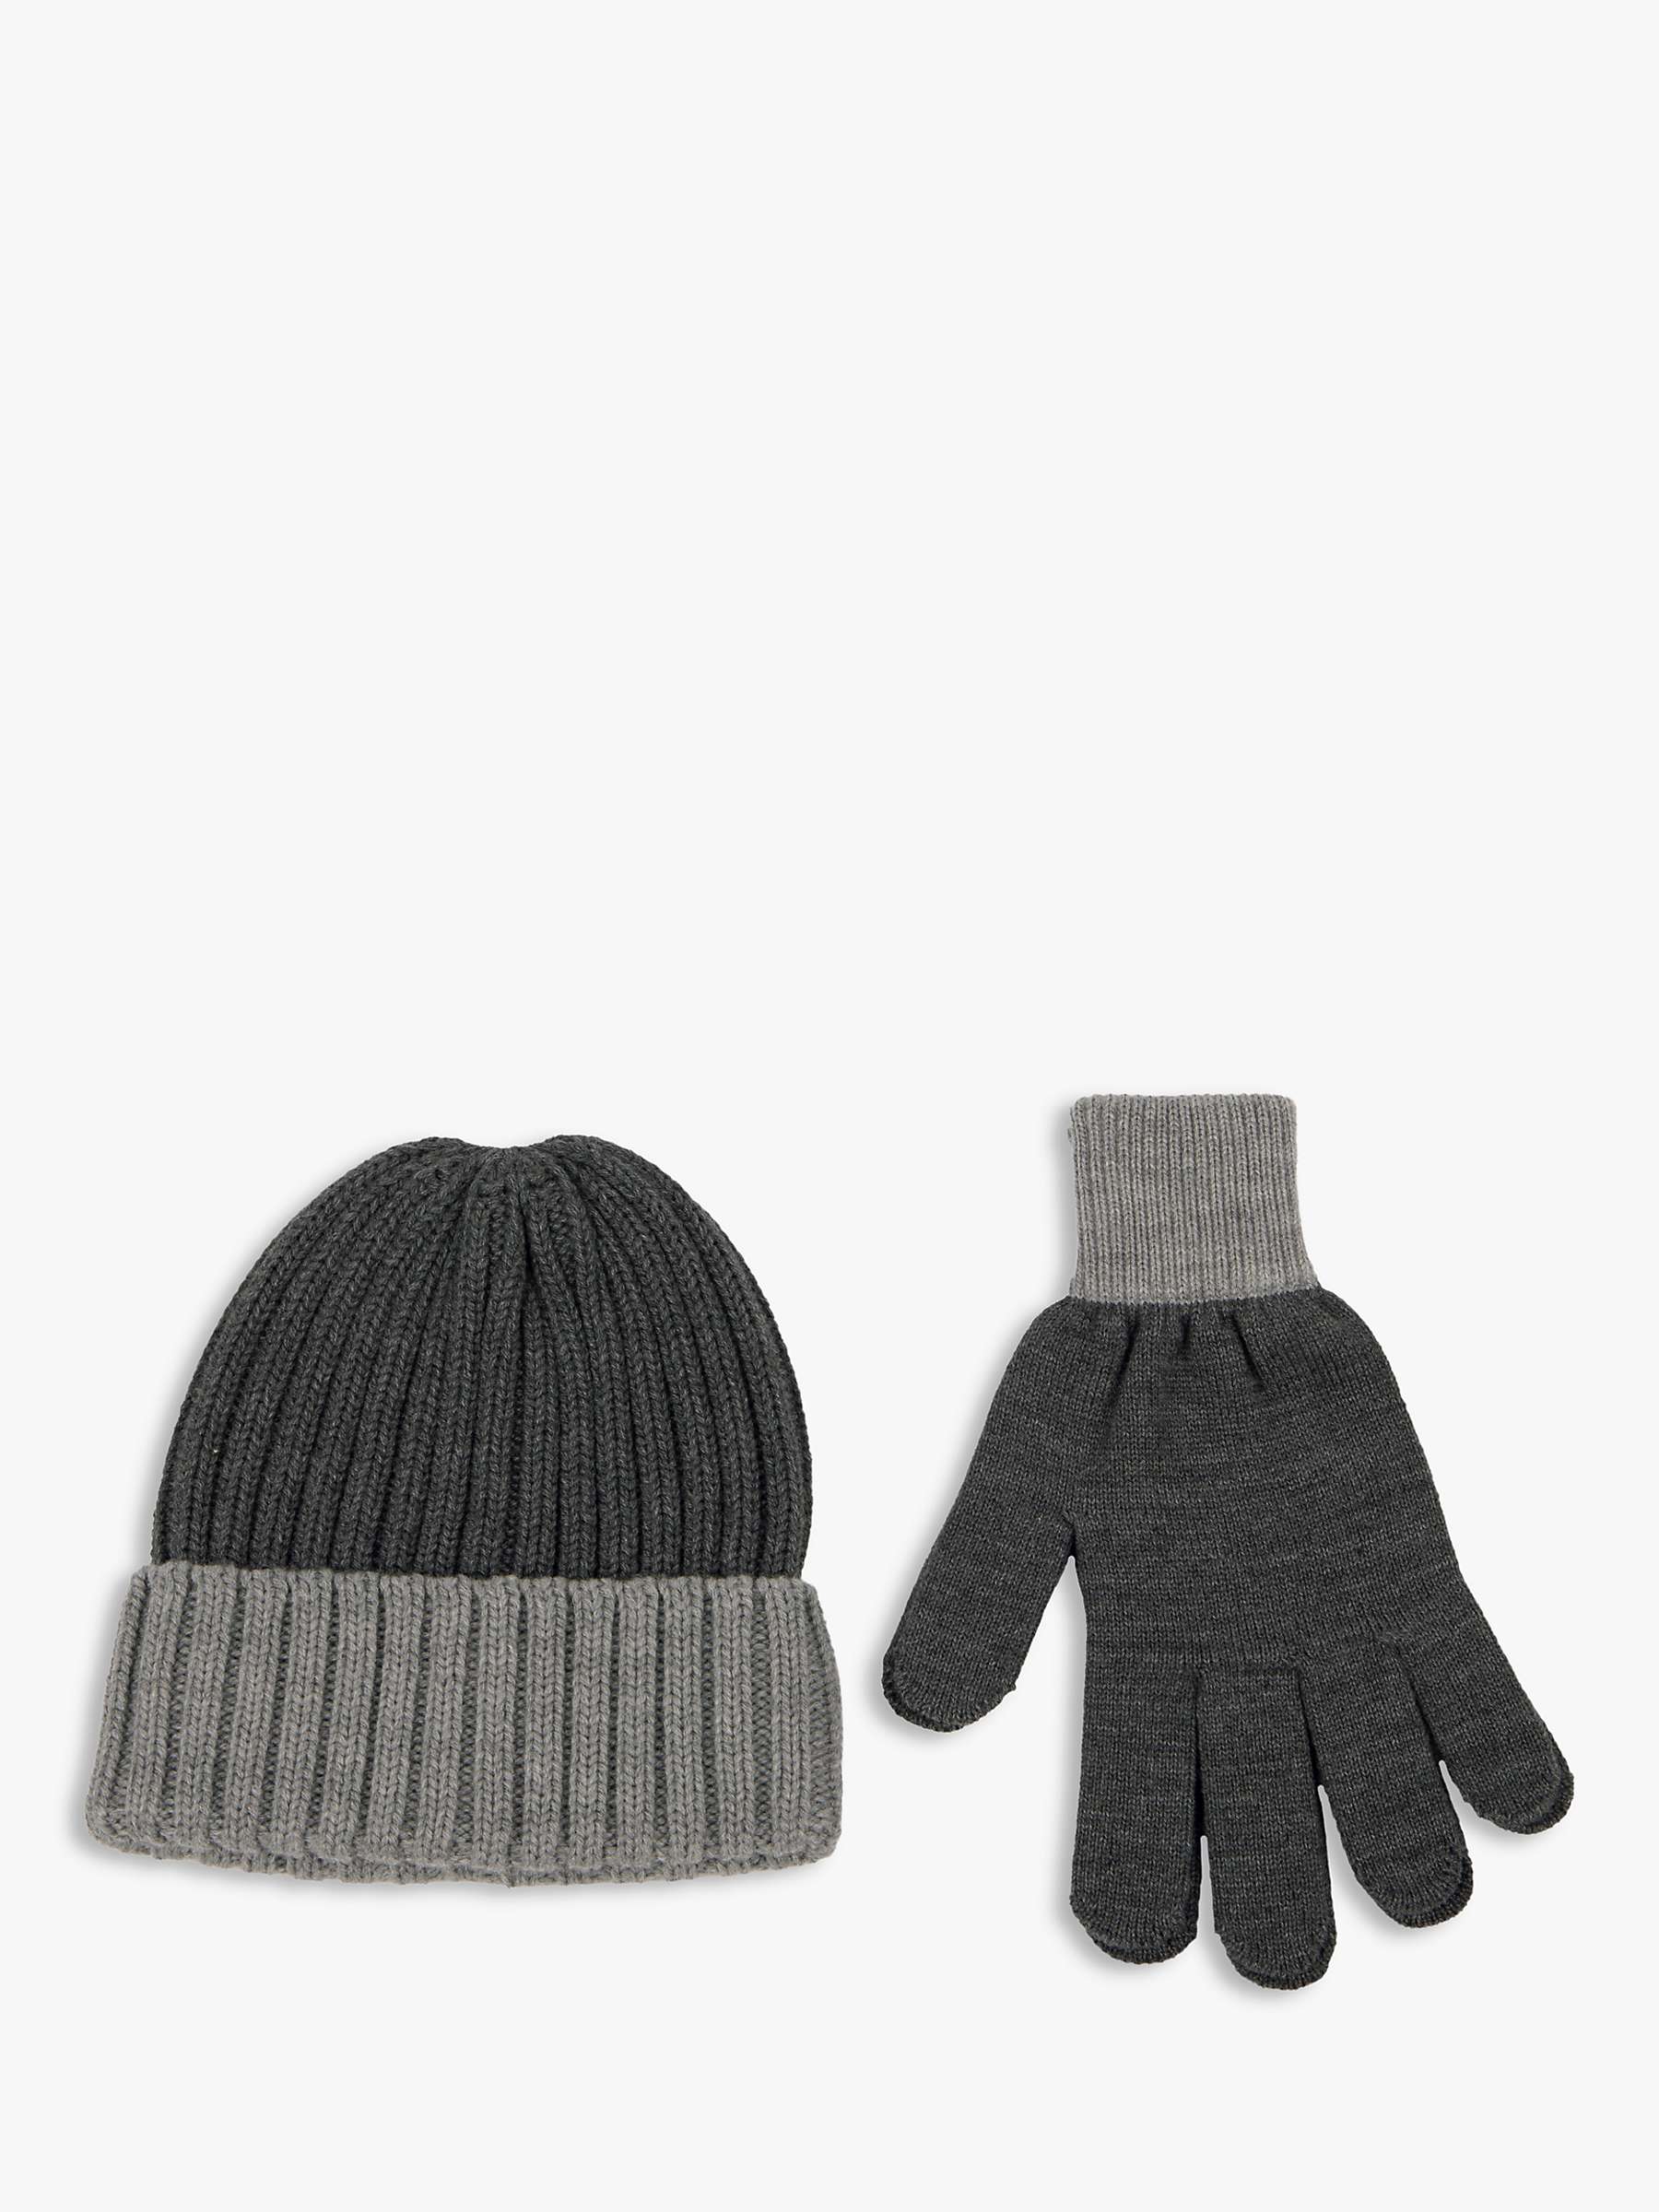 Buy totes Chunky Knitted Hat and Gloves Set, Charcoal Online at johnlewis.com